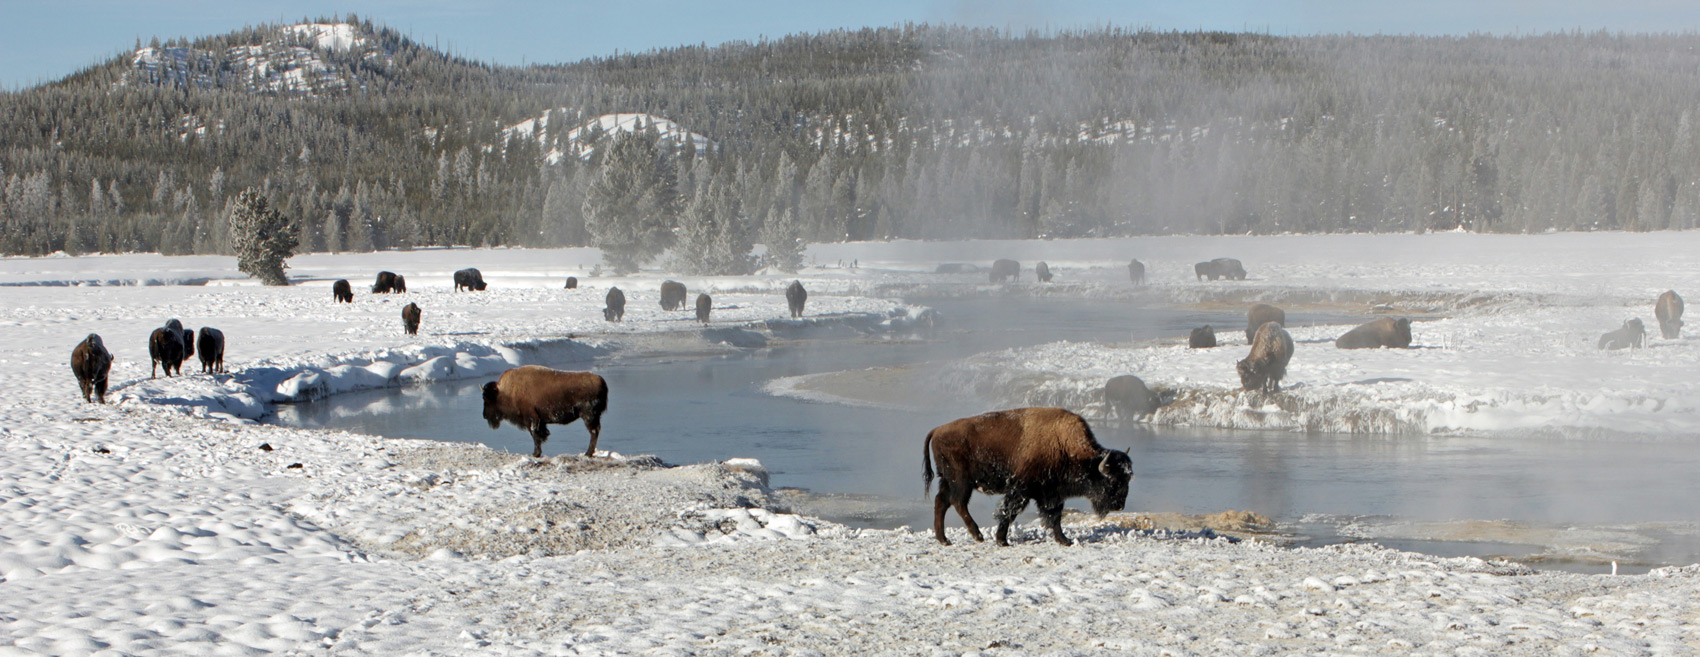 bisons in yellowstone national park 